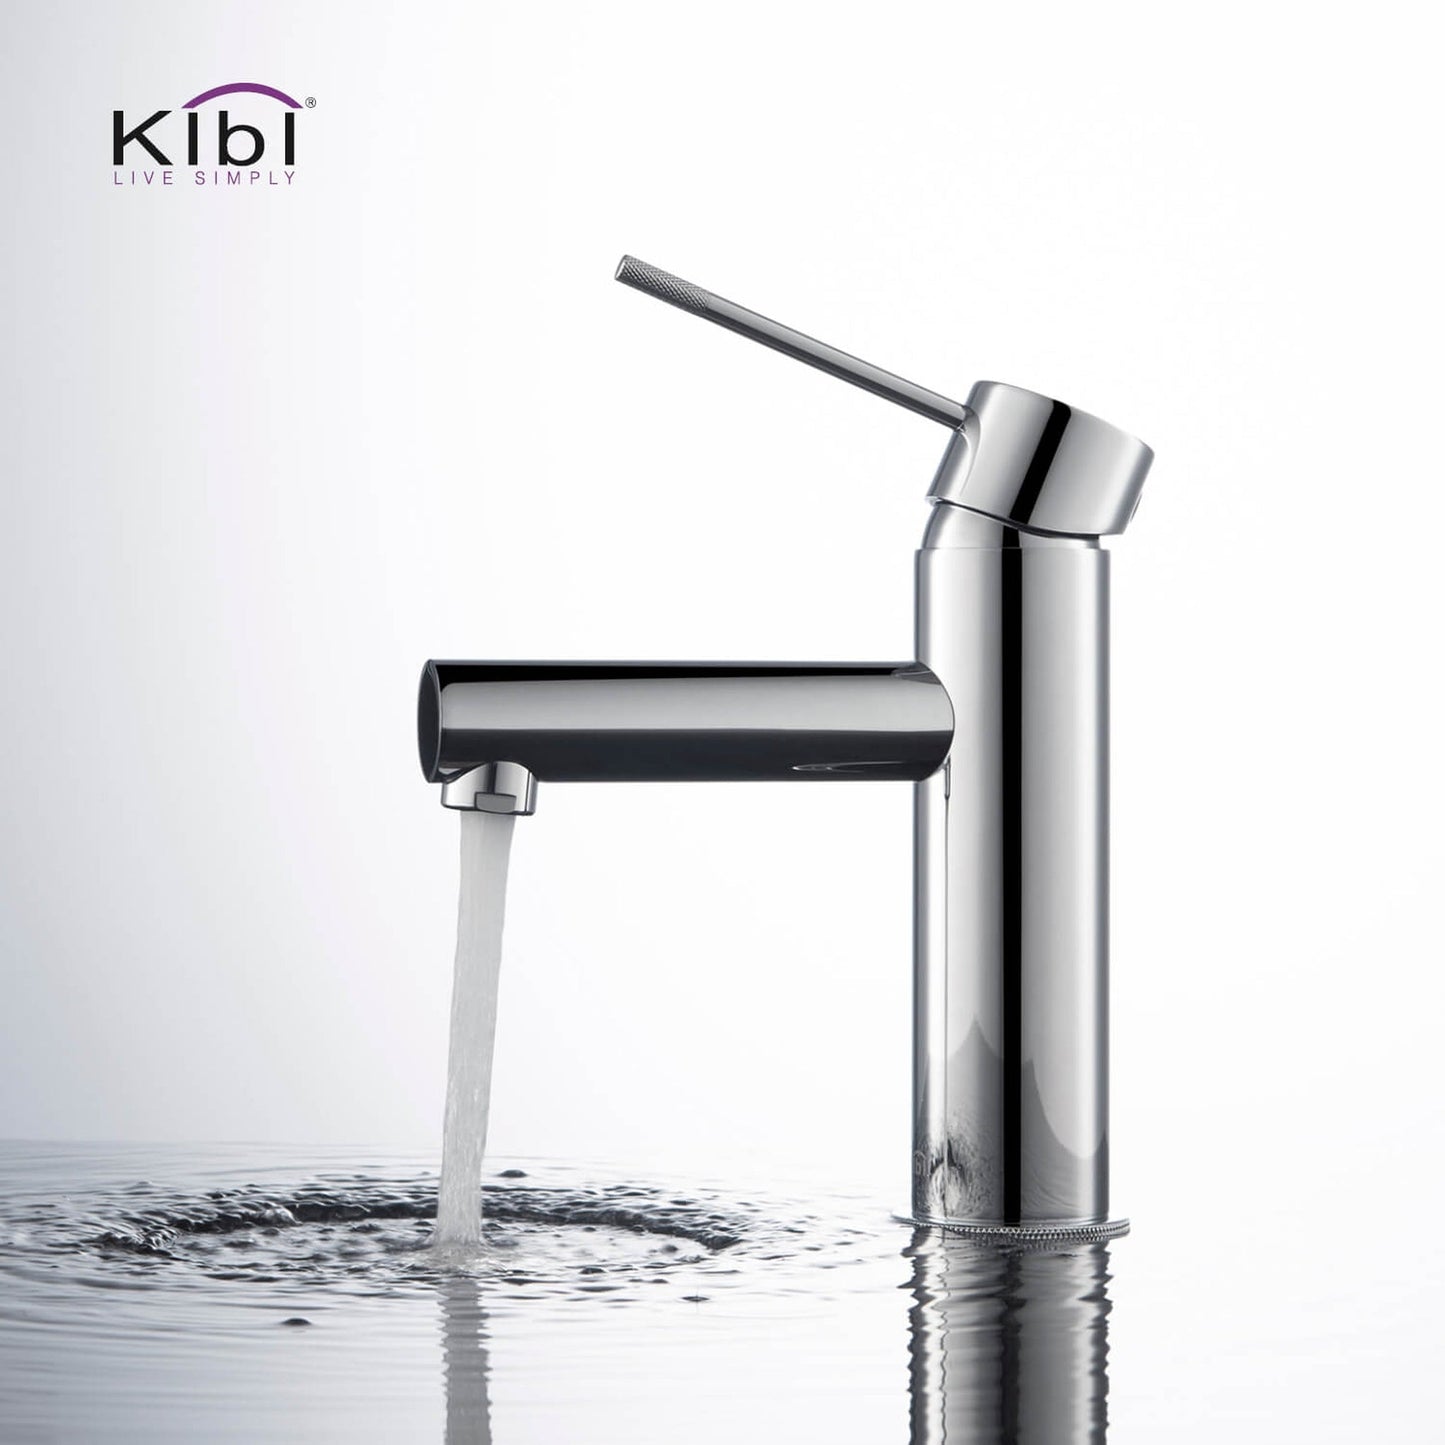 KIBI Circular X Single Handle Chrome Solid Brass Bathroom Sink Faucet With Pop-Up Drain Stopper With Overflow